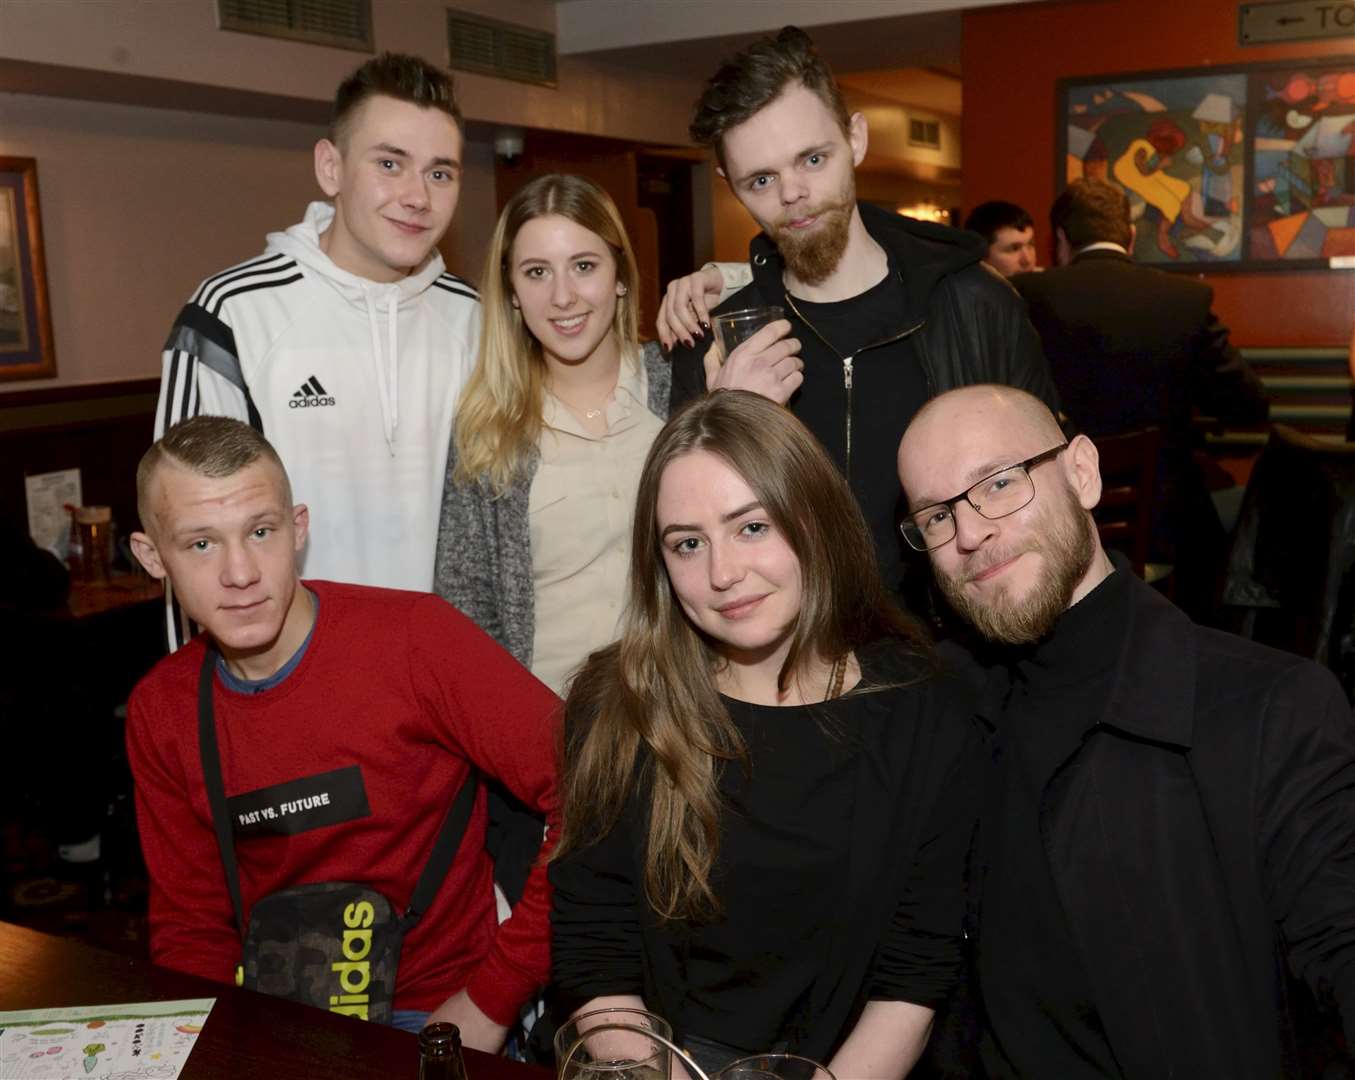 Maciej Jagielo (right, back) on his 21st birthday celebration with friends.